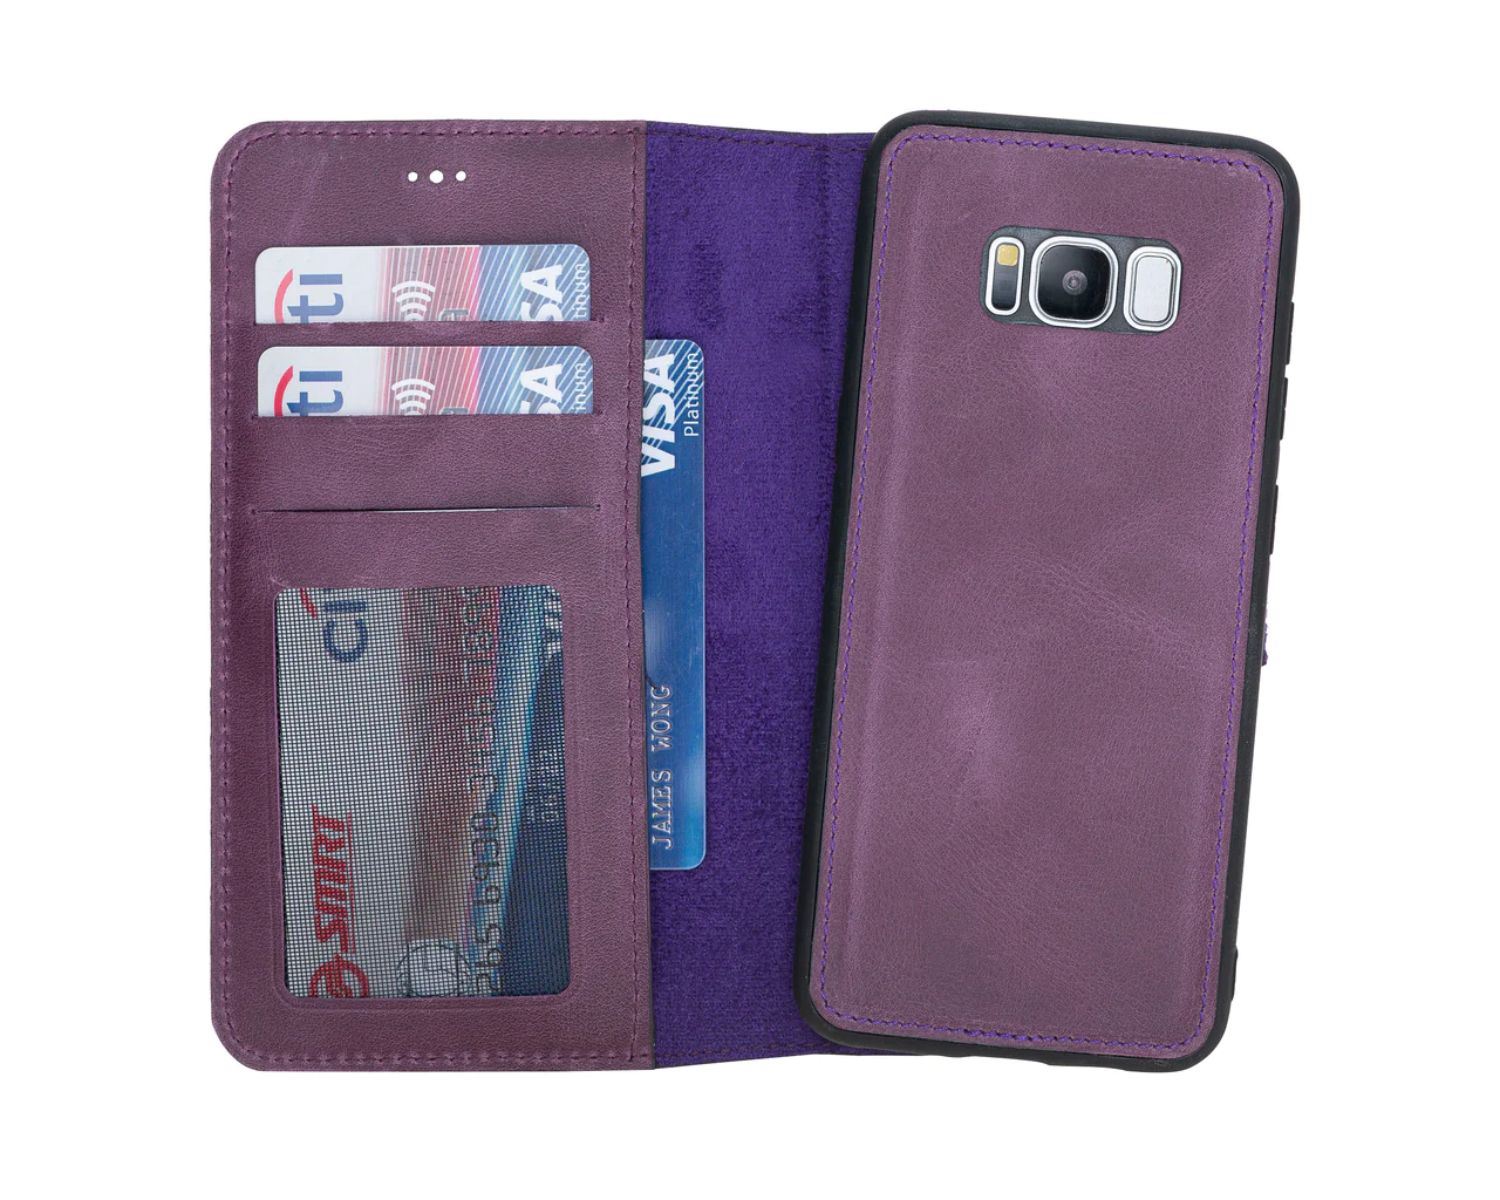 19-astounding-facts-about-s8-plus-cardholder-cases